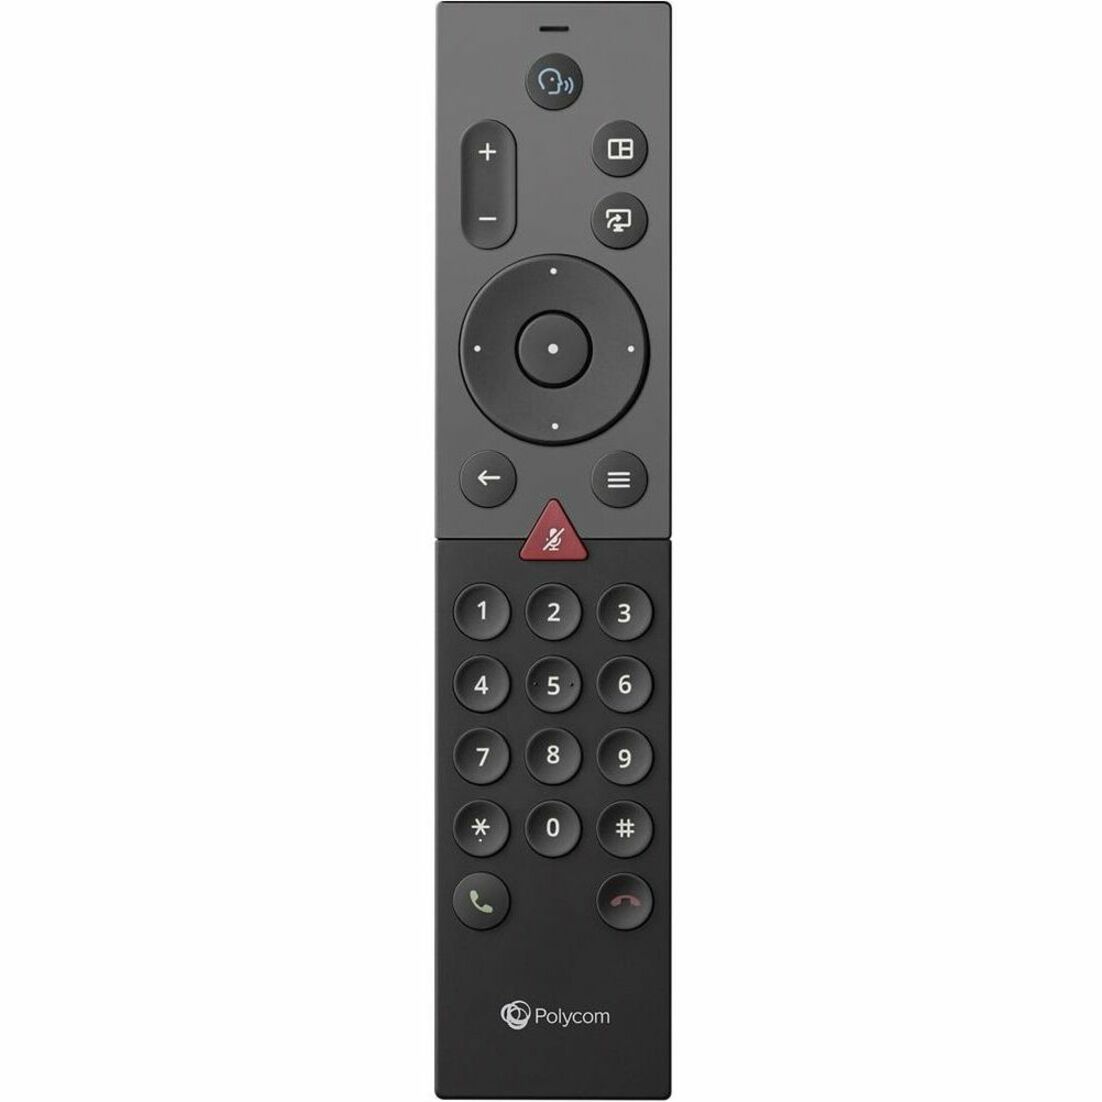 Poly 7200-85860-001 G7500 Video Conference Equipment, 4K UHD, Bluetooth Remote Control